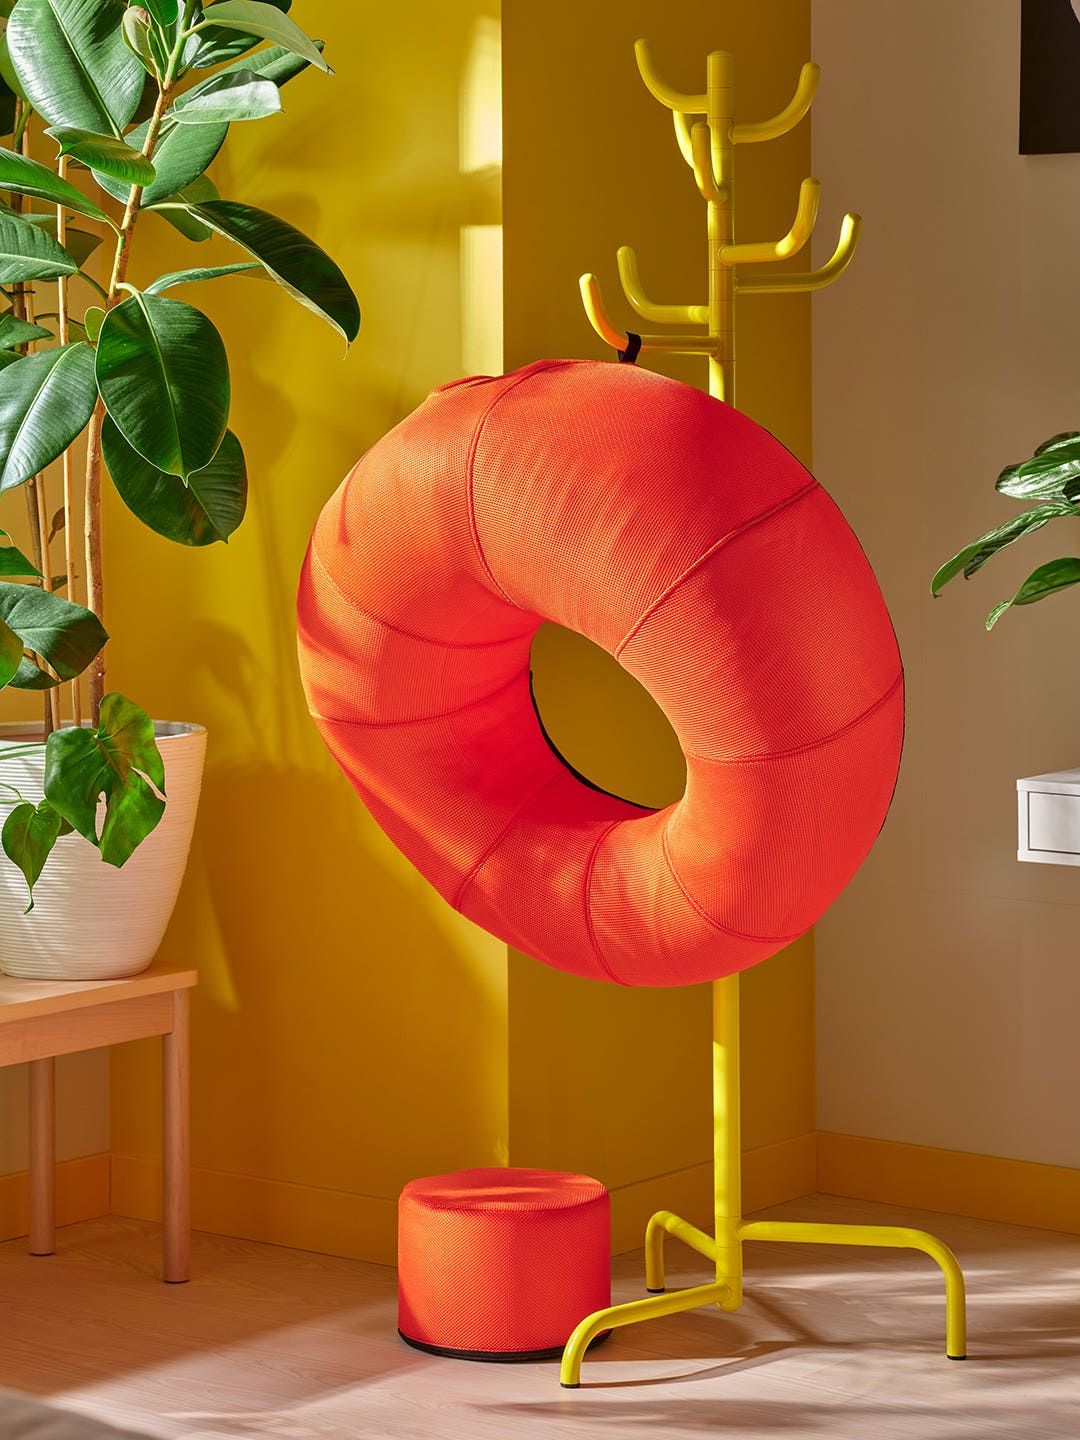 orange inflatable donut chair hanging from a coatrack